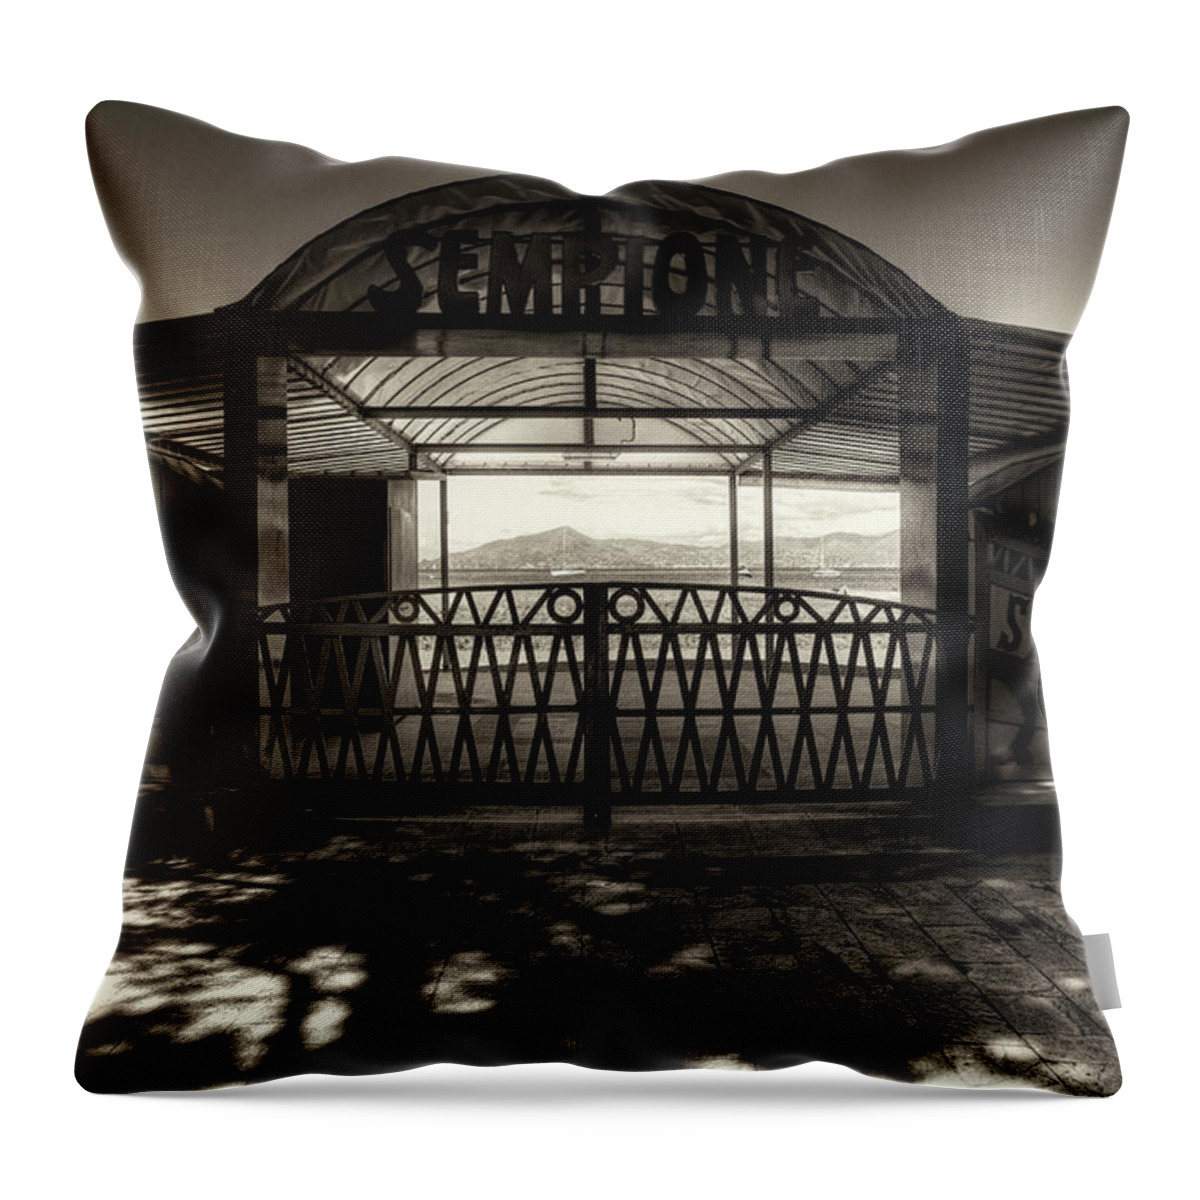 B&w Throw Pillow featuring the photograph Bagni Sempione by Roberto Pagani